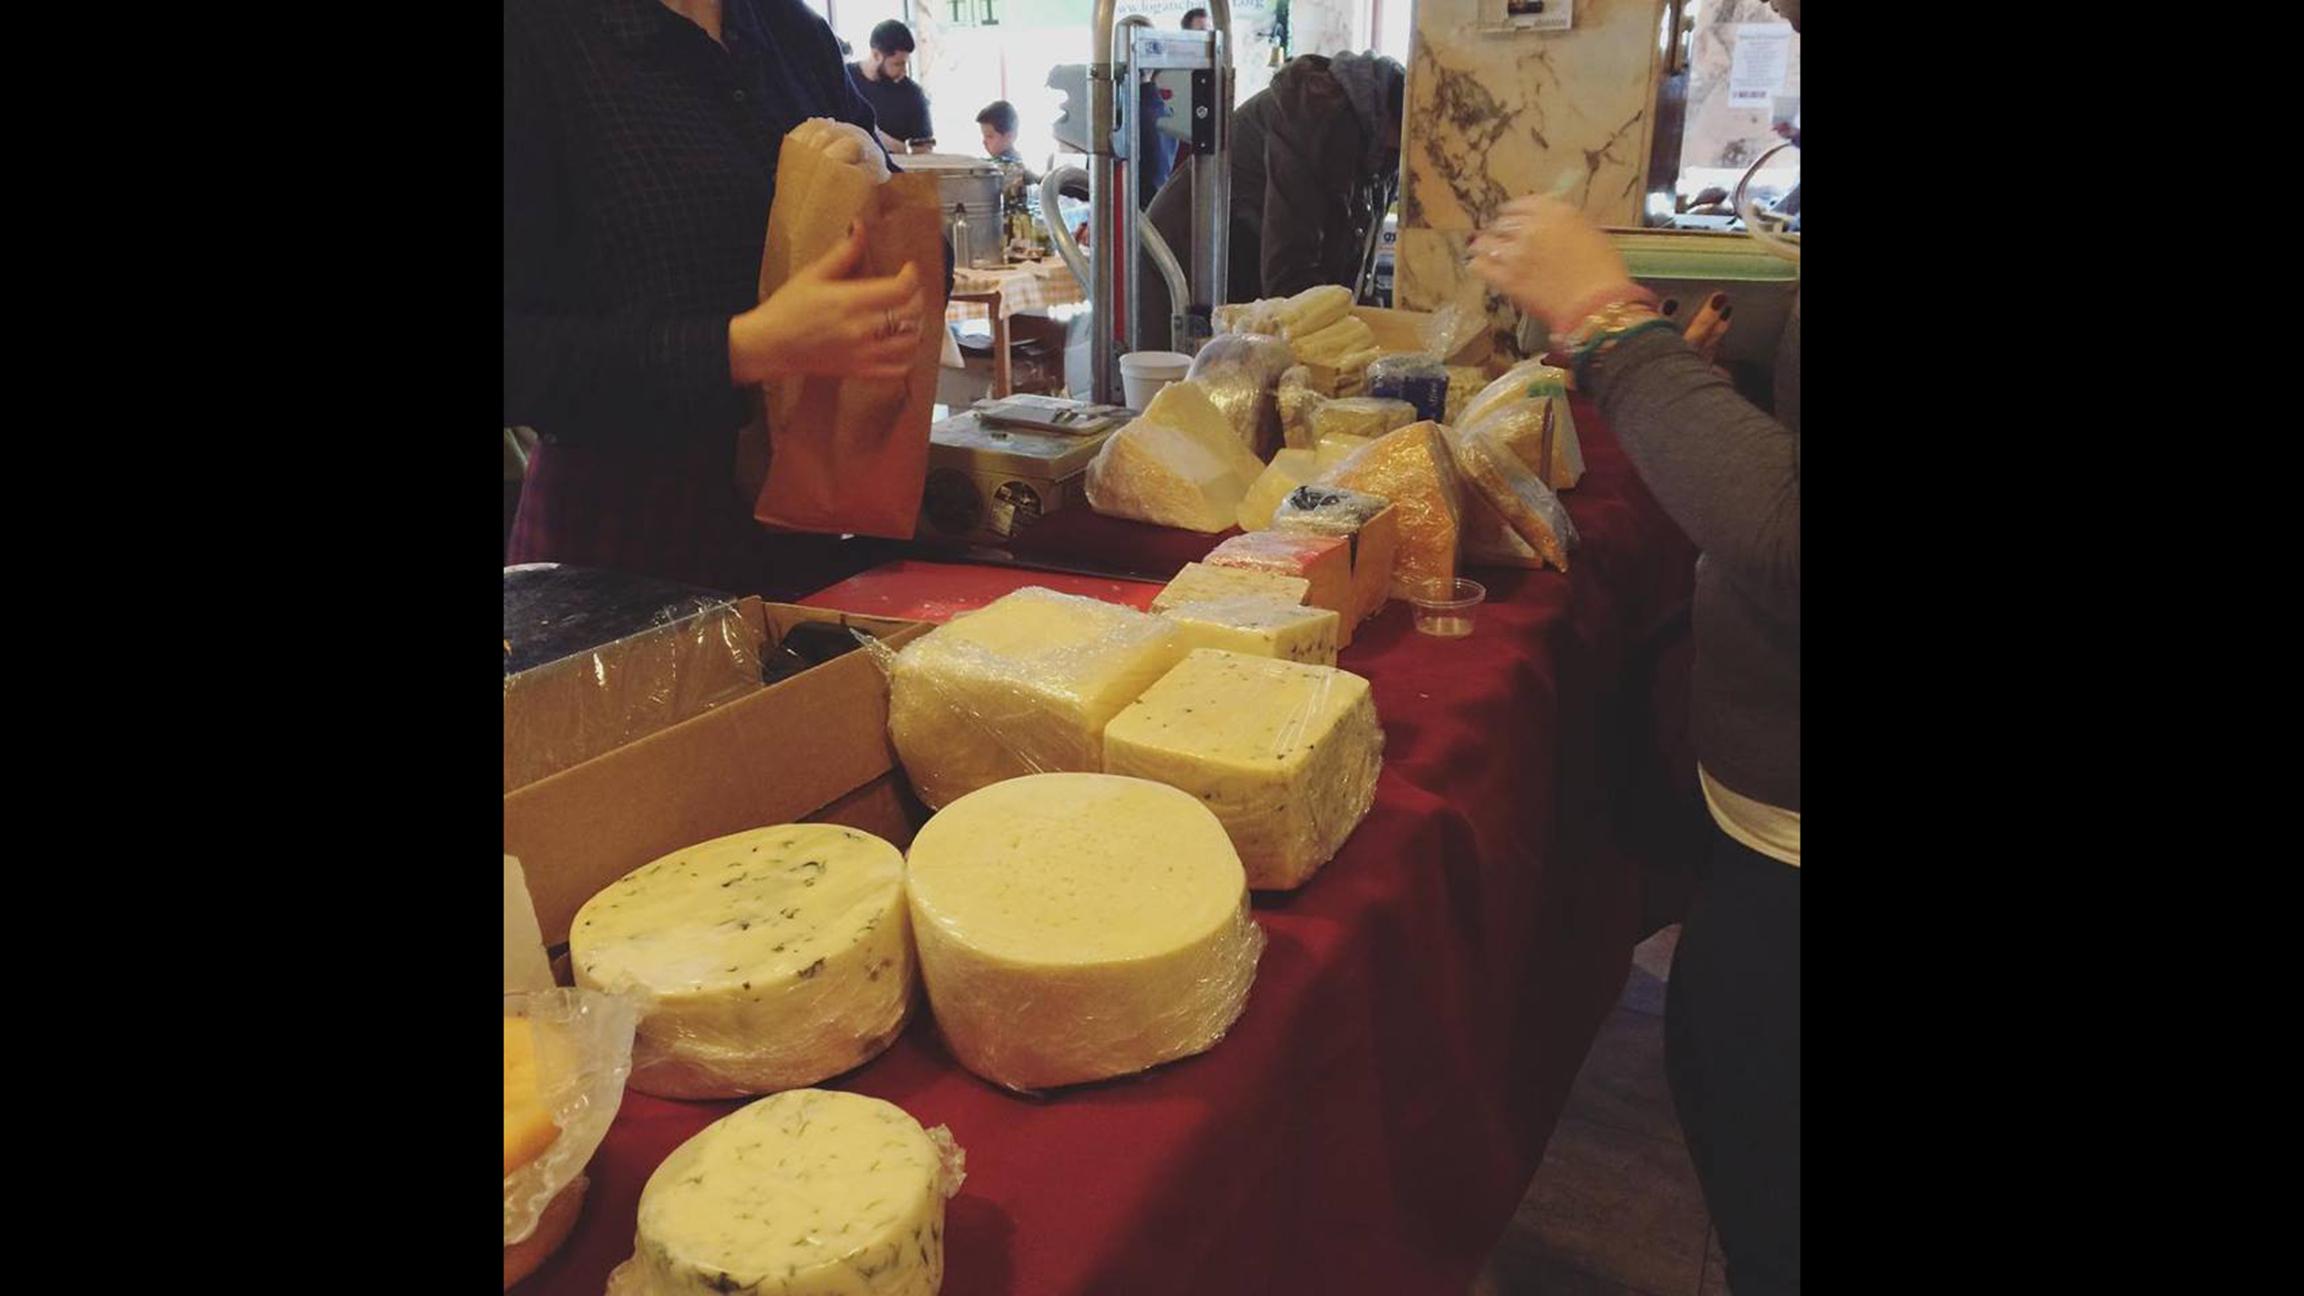 Say cheese! Stock up on Stamper Cheese options and other delights at the Holiday Pop-Up Farmers Market. (Logan Square Farmers Market / Facebook)